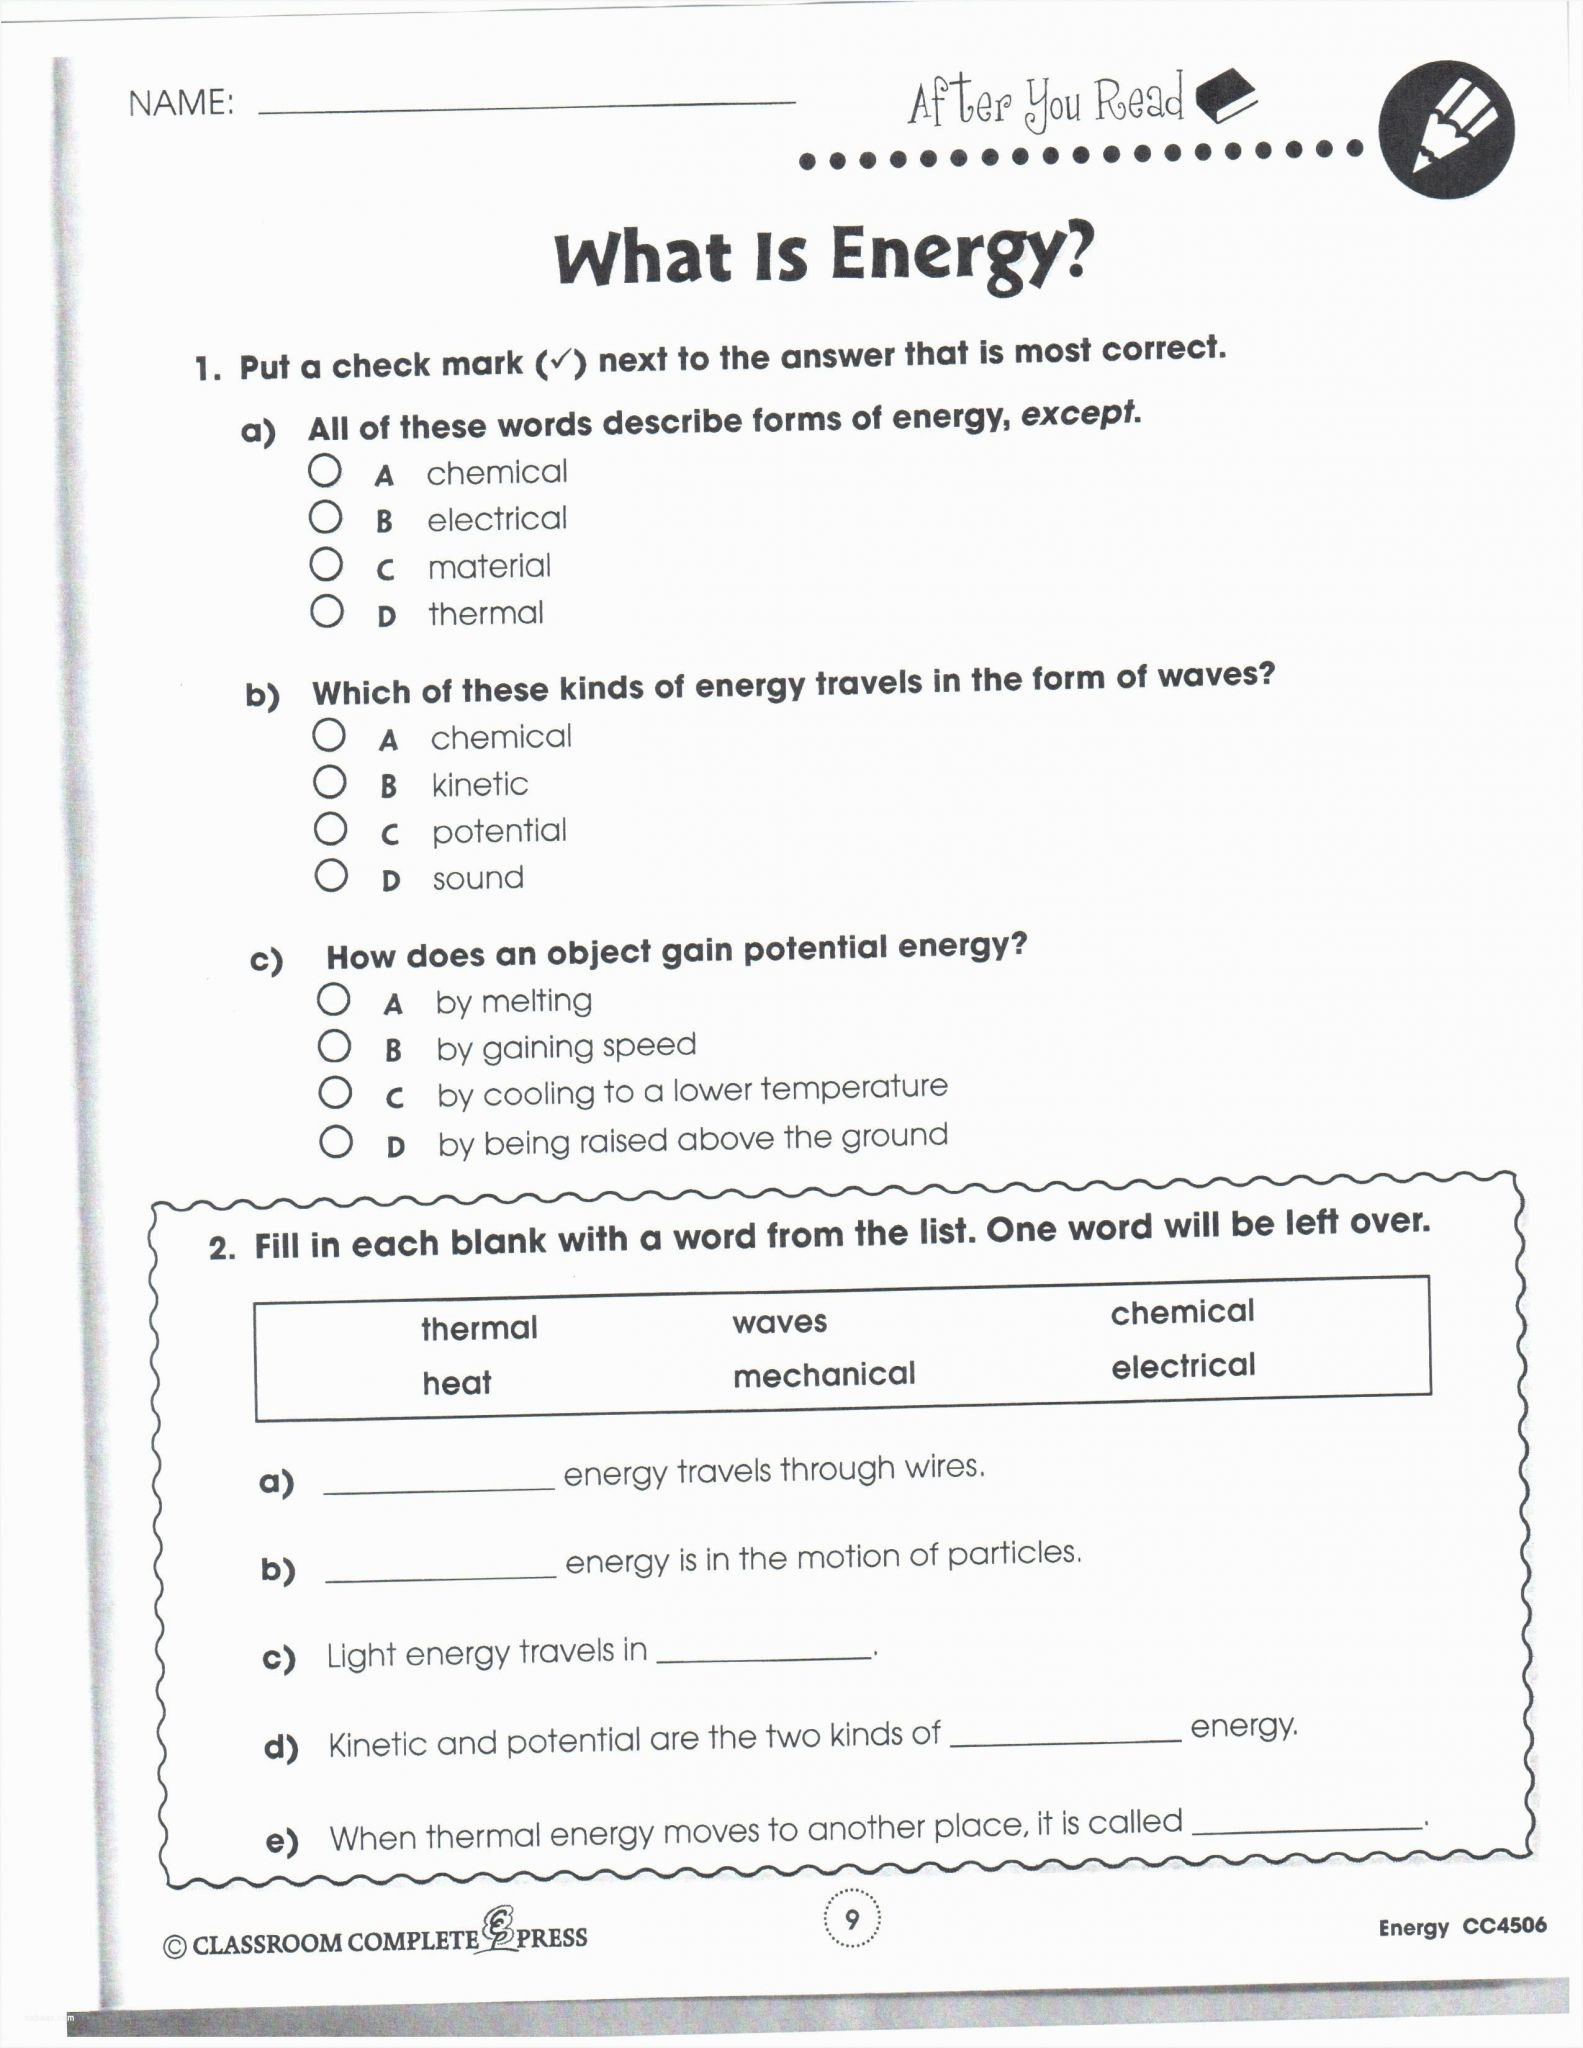 Apollo 13 Movie Worksheet Answers  Briefencounters For Donald In Mathmagic Land Worksheet Answers